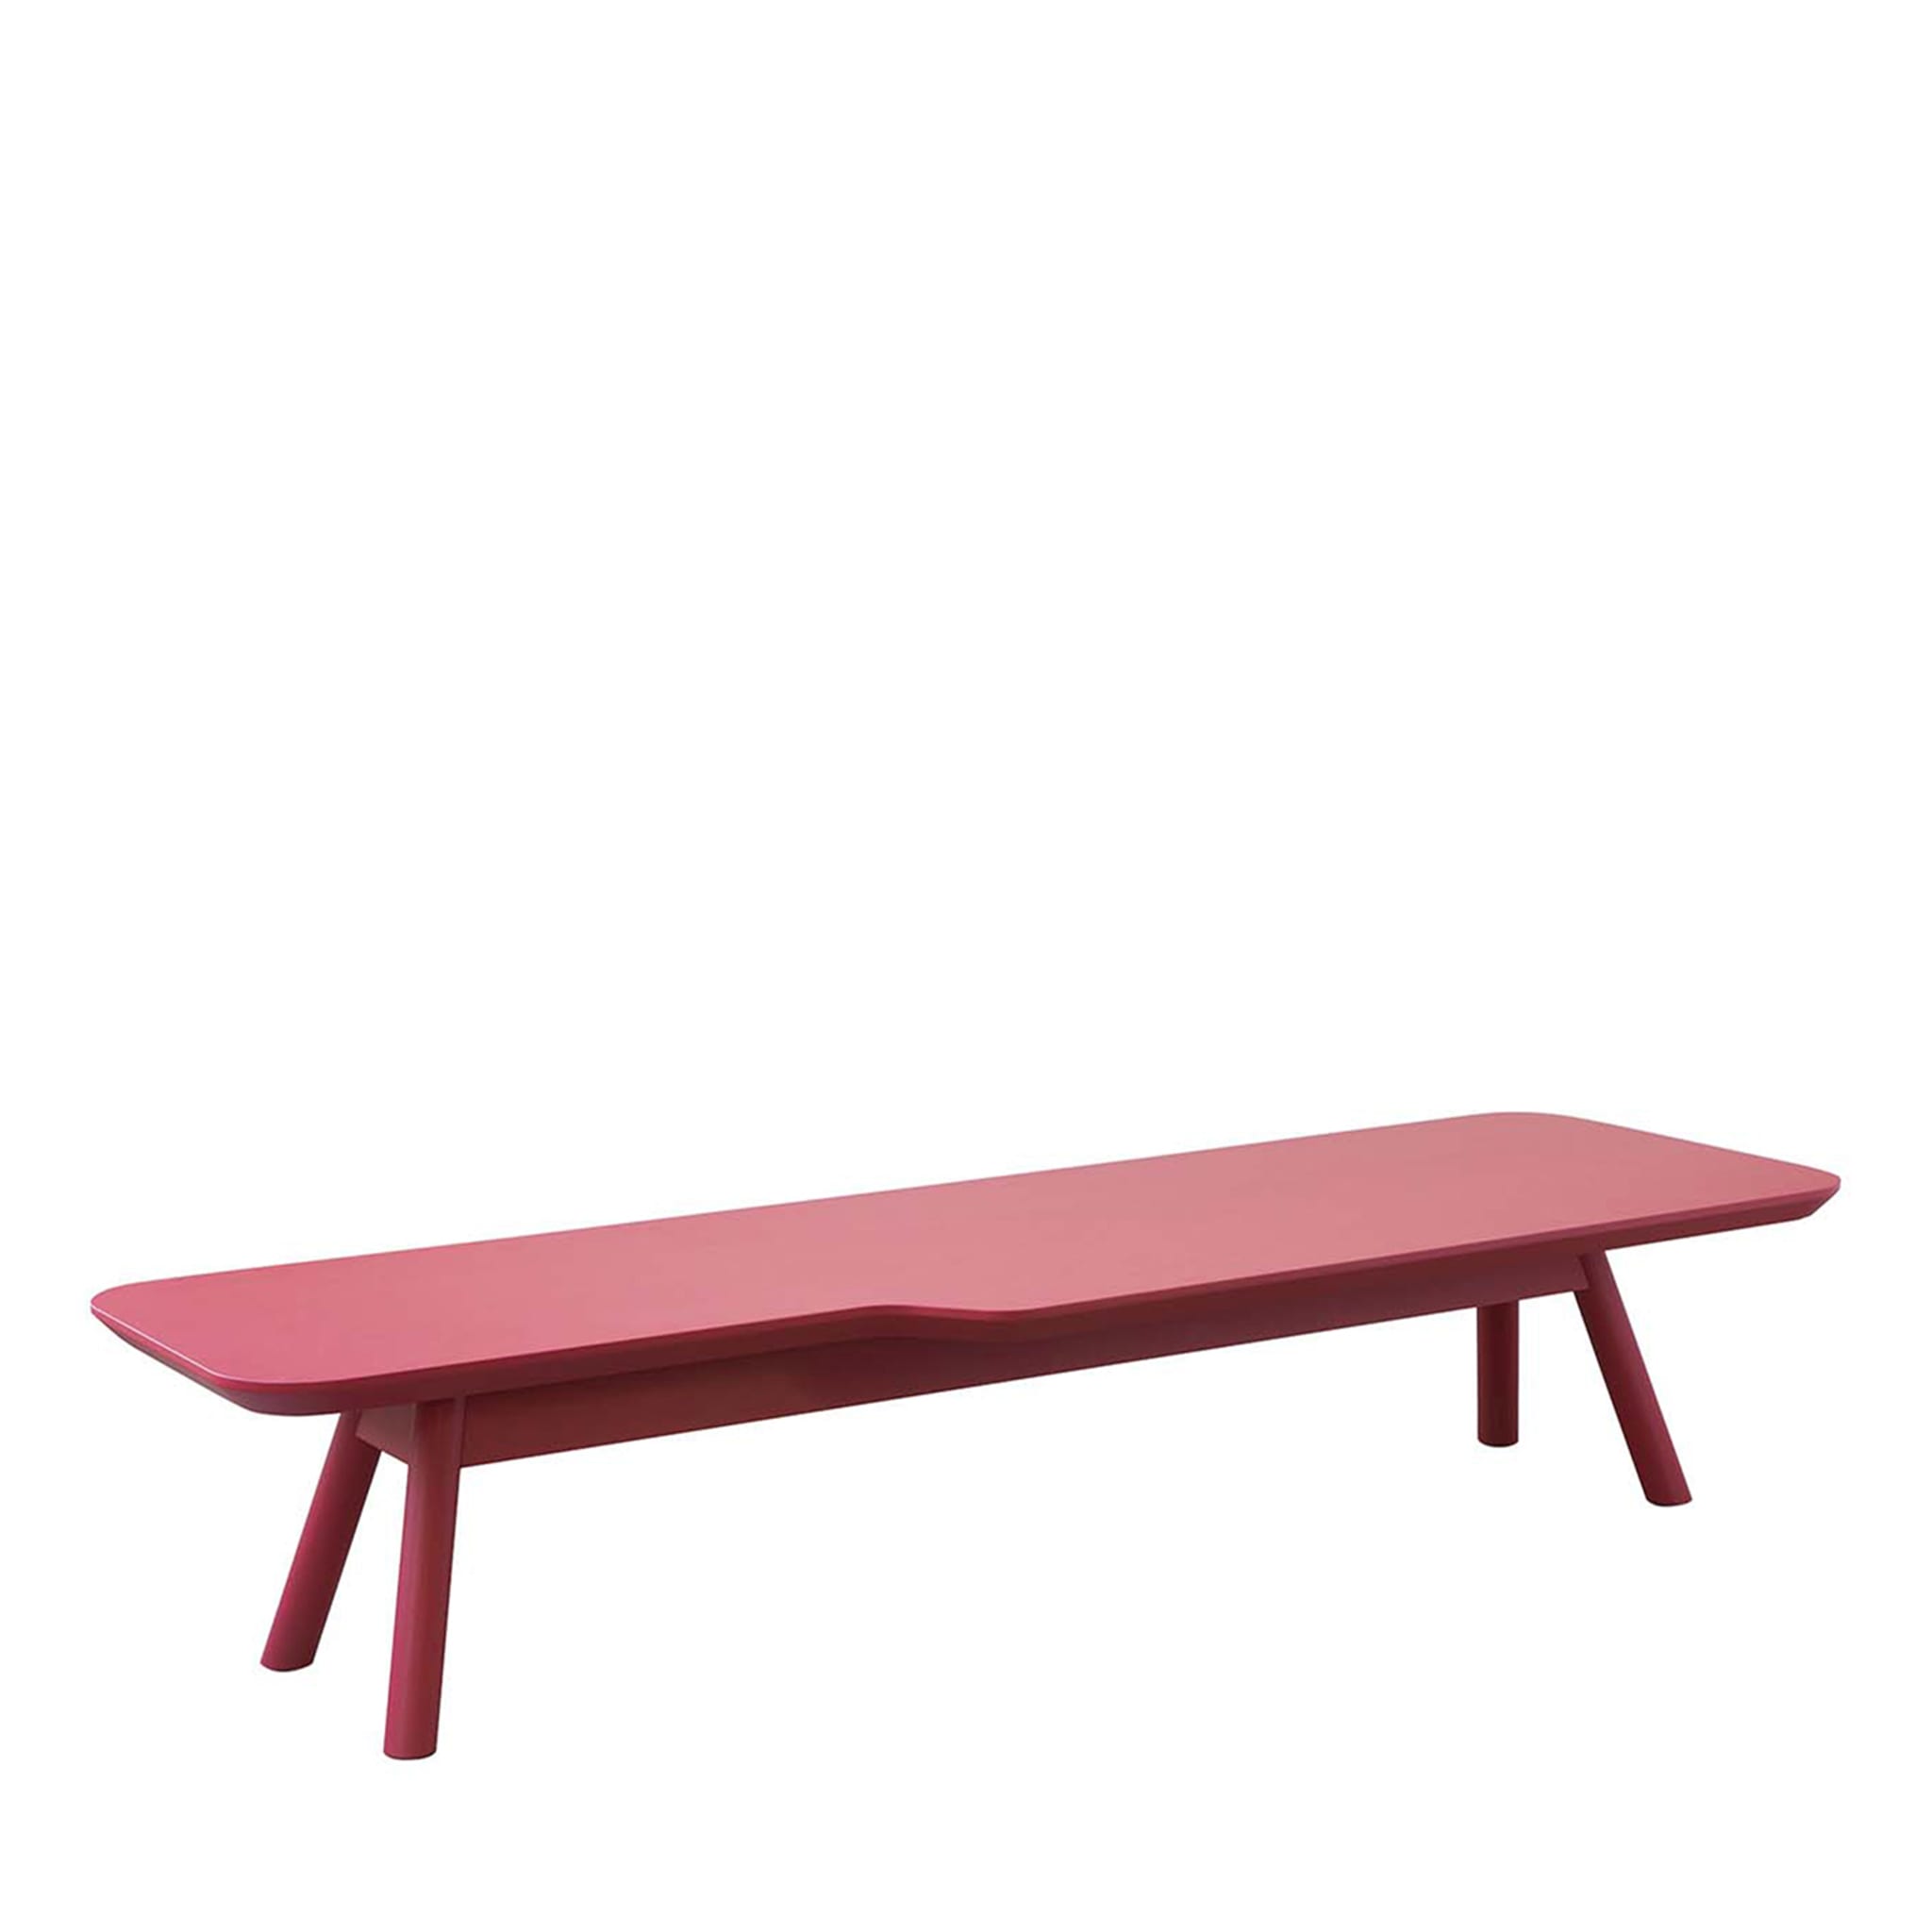 Aky Red Table by Emilio Nanni - Main view